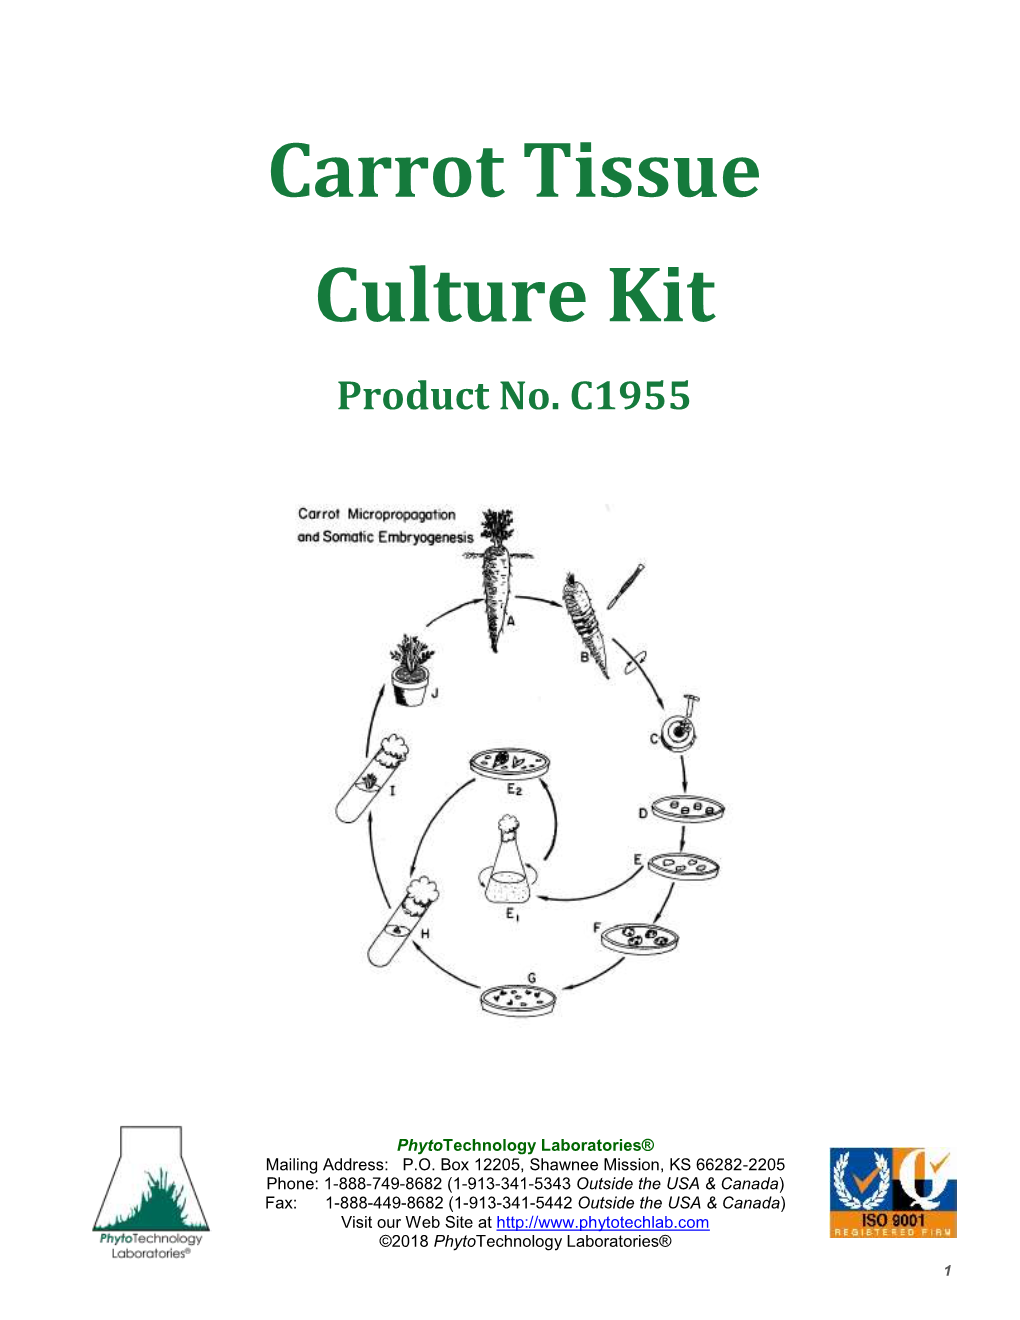 Carrot Tissue Culture Kit Product No